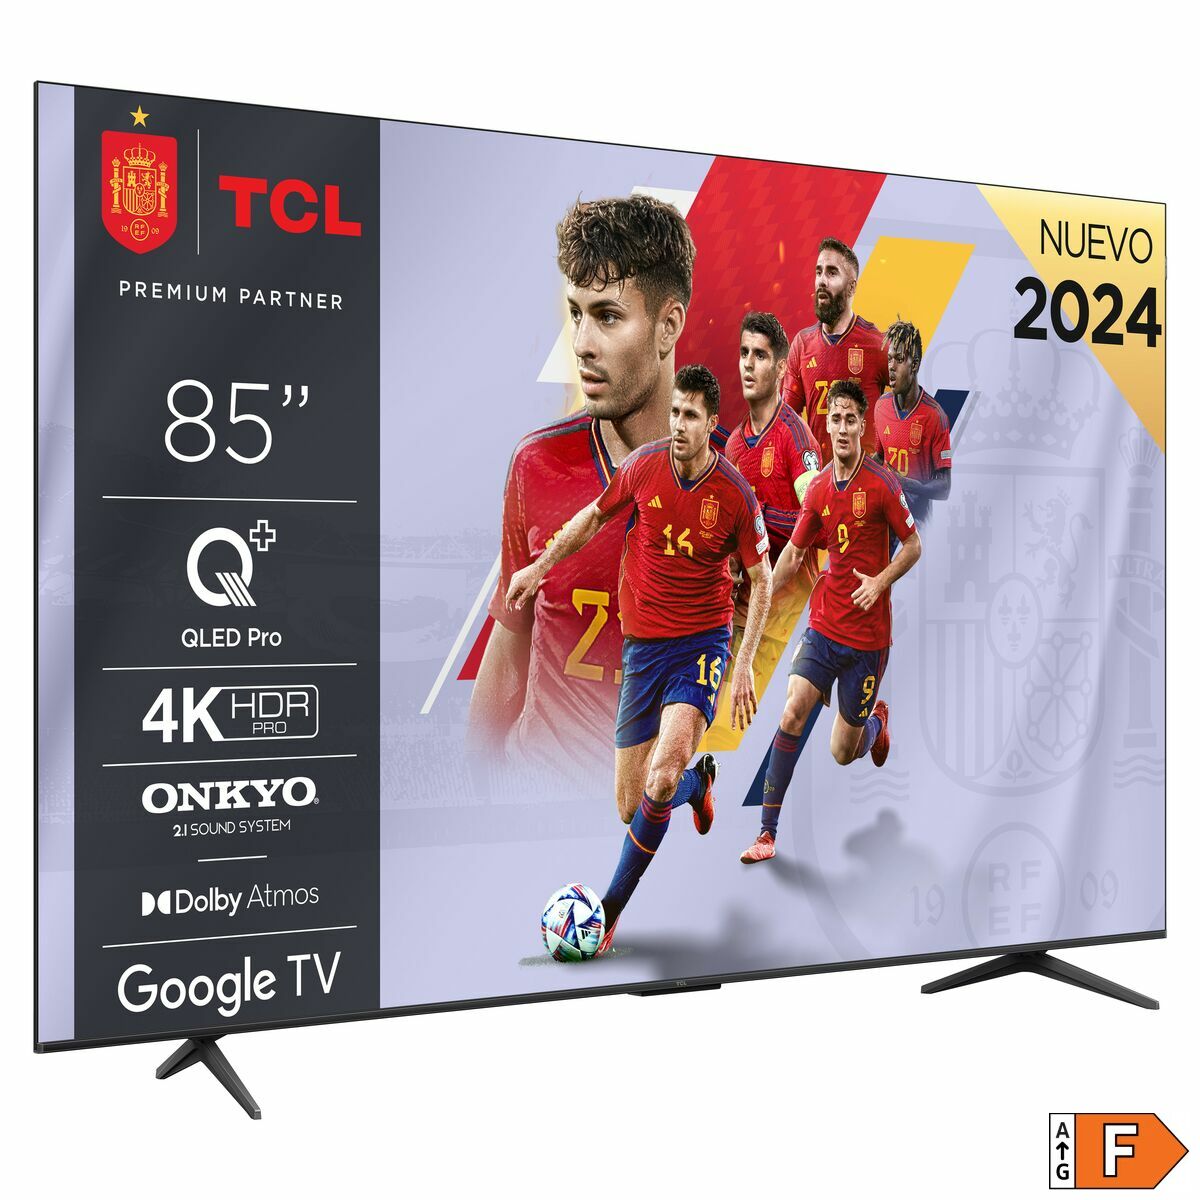 Smart TV TCL 85C655 4K Ultra HD QLED 85", TCL, Electronics, TV, Video and home cinema, smart-tv-tcl-85c655-4k-ultra-hd-qled-85, Brand_TCL, category-reference-2609, category-reference-2625, category-reference-2931, category-reference-t-18805, category-reference-t-18827, category-reference-t-19653, cinema and television, Condition_NEW, entertainment, Price_+ 1000, UEFA Euro 2020, RiotNook